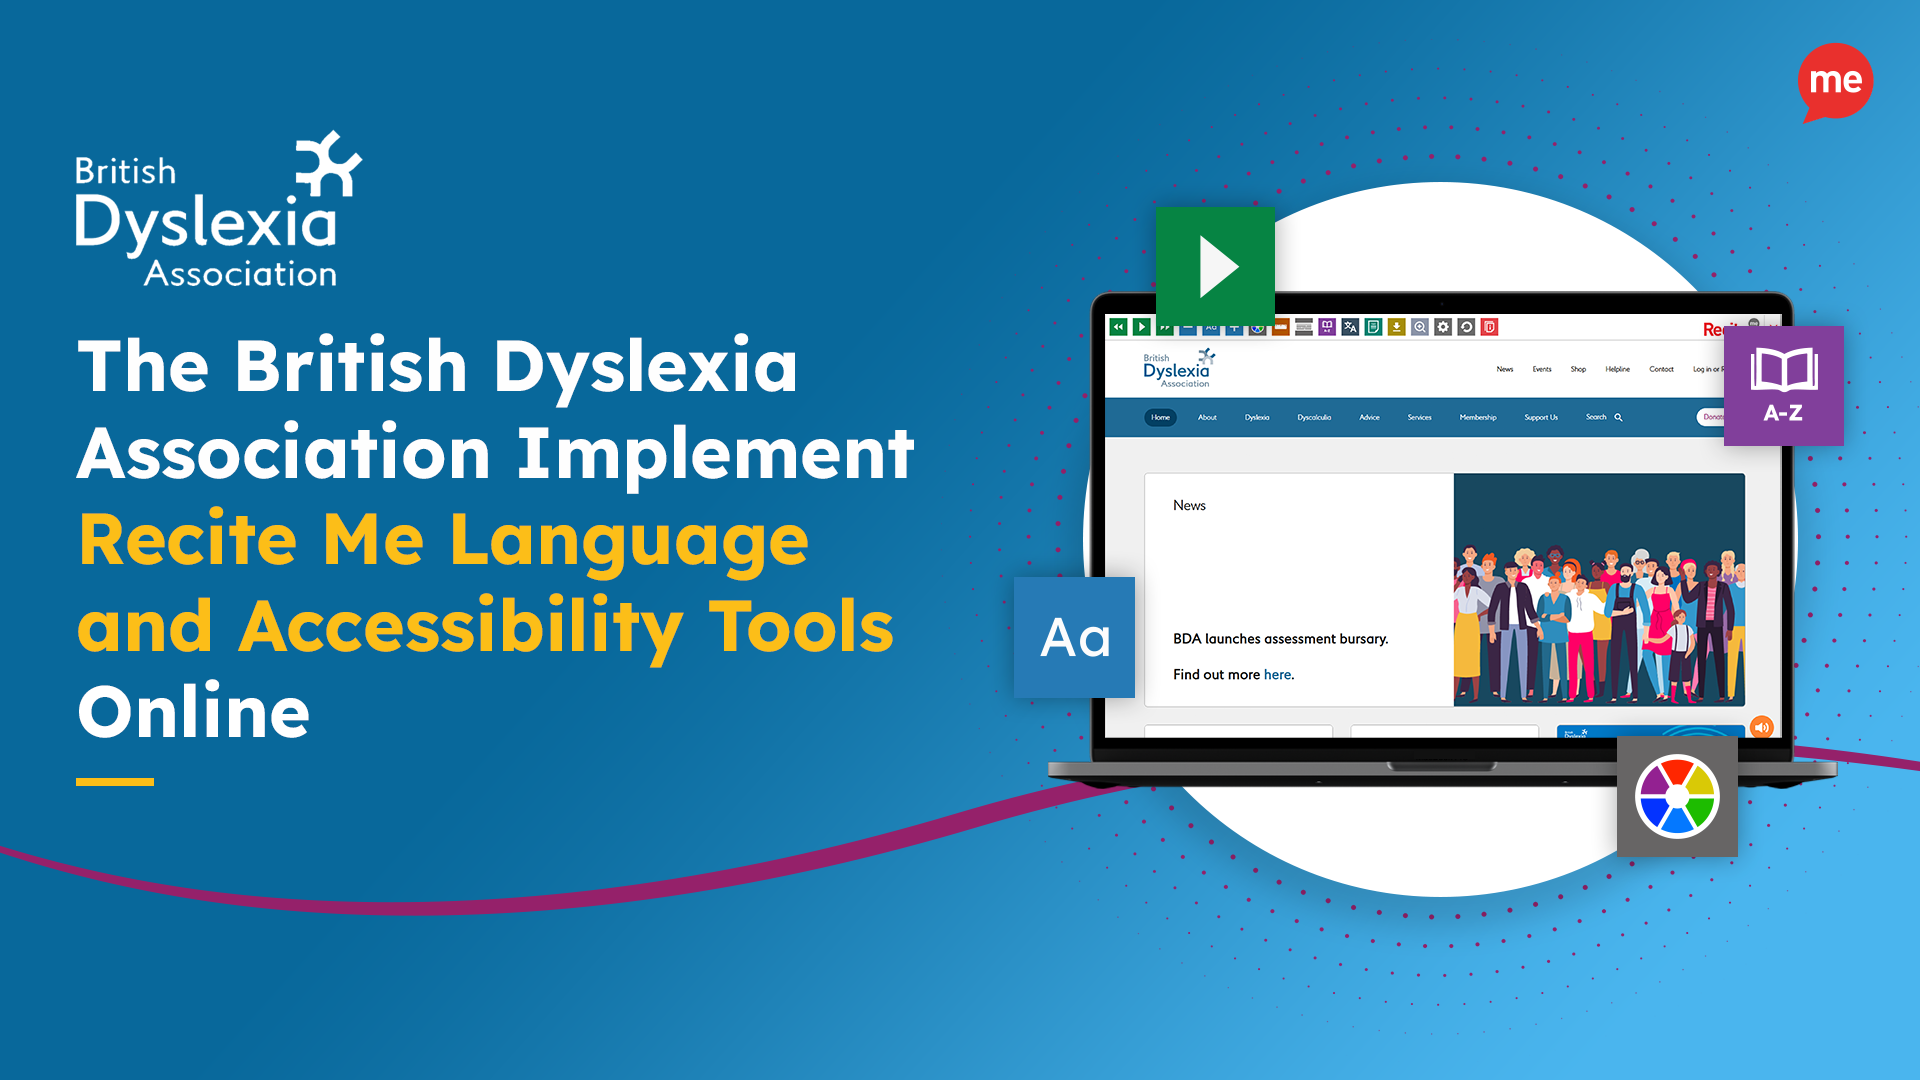 The British Dyslexia Association Implement Recite Me Language and Accessibility Tools Online